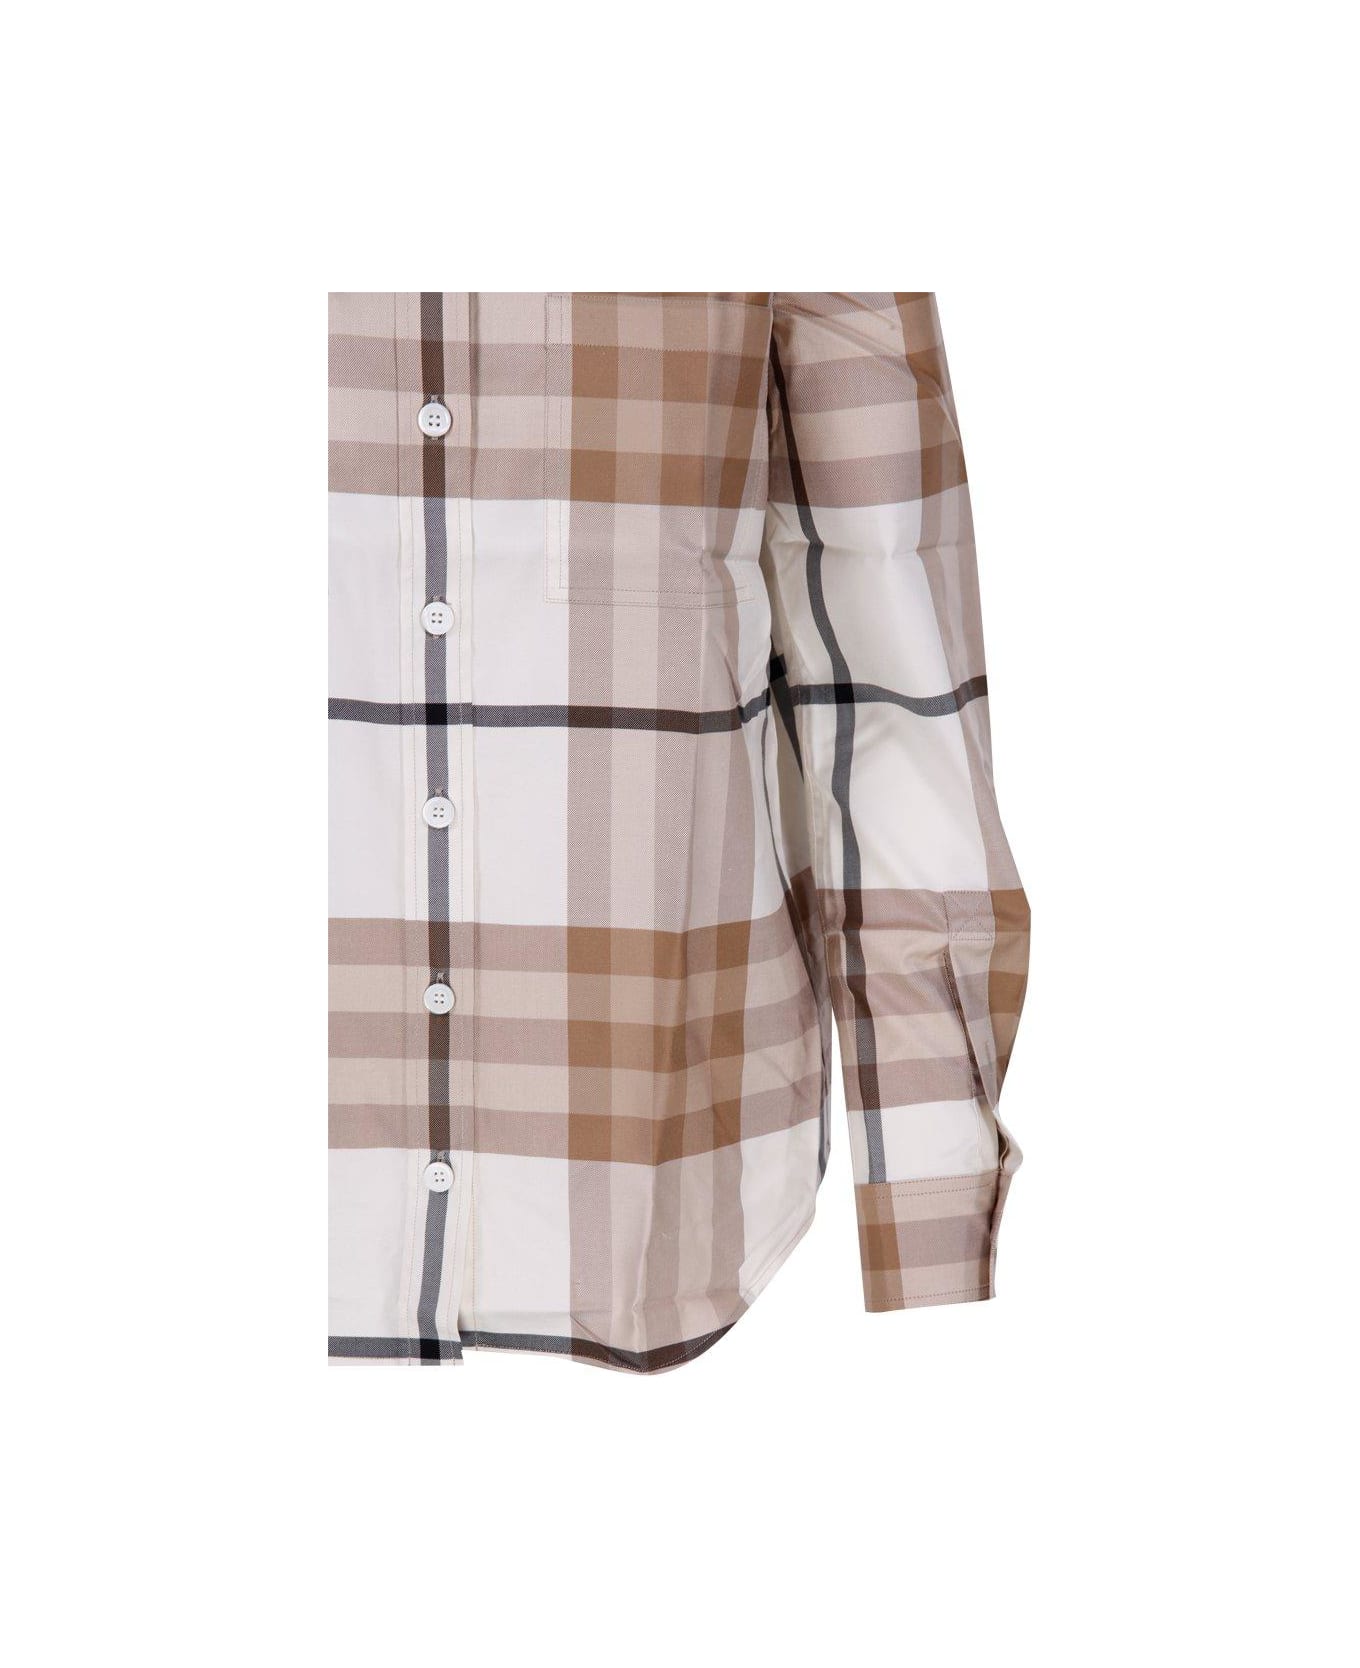 Burberry Checked Long-sleeved Shirt - MULTICOLOUR